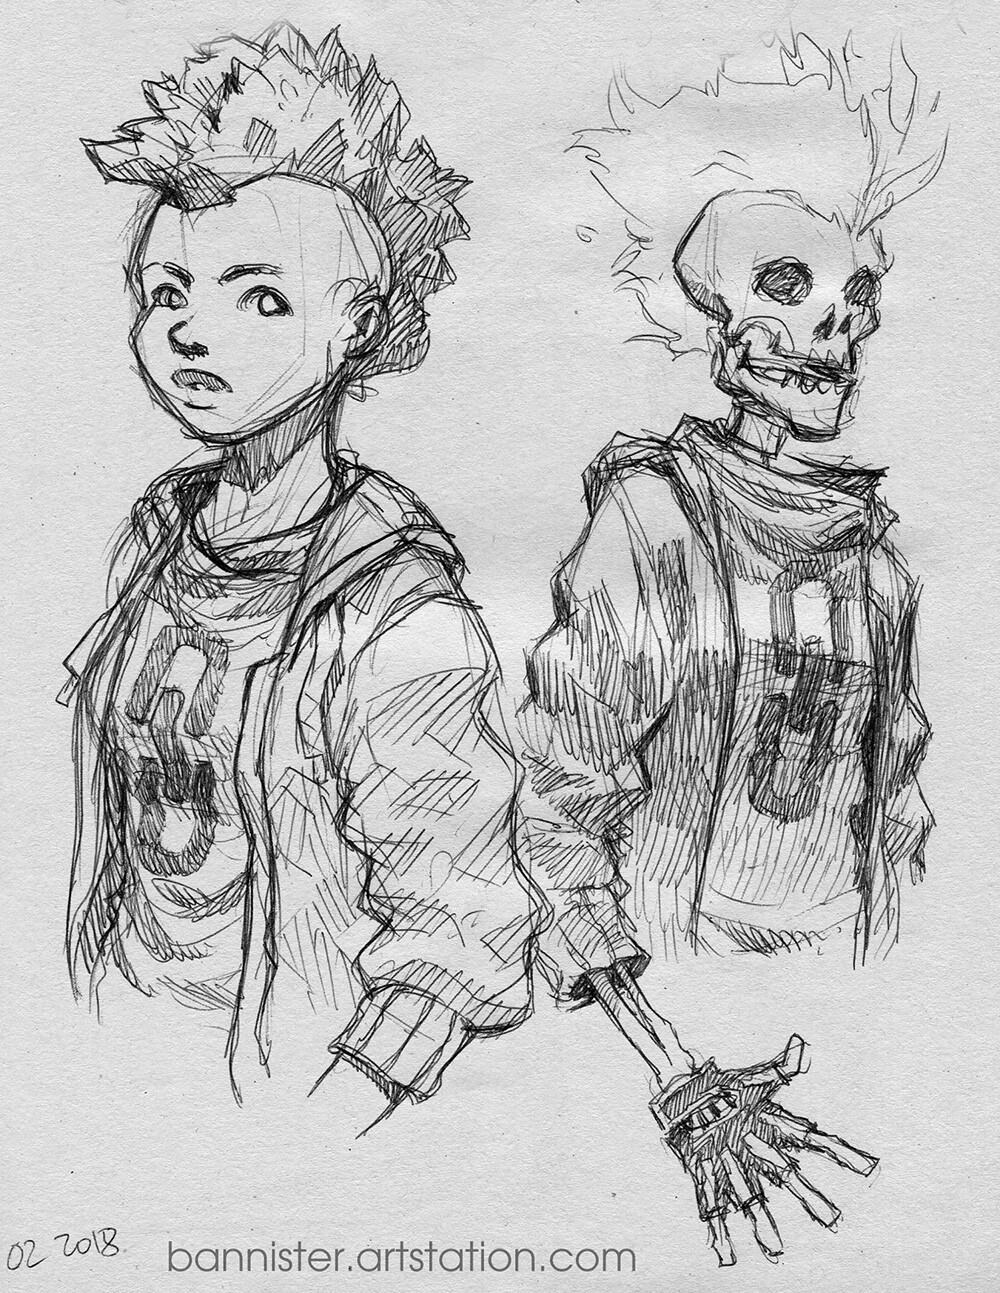 Let's enter the section concerning the Very first character design direction, who was more punk oriented and more adult.